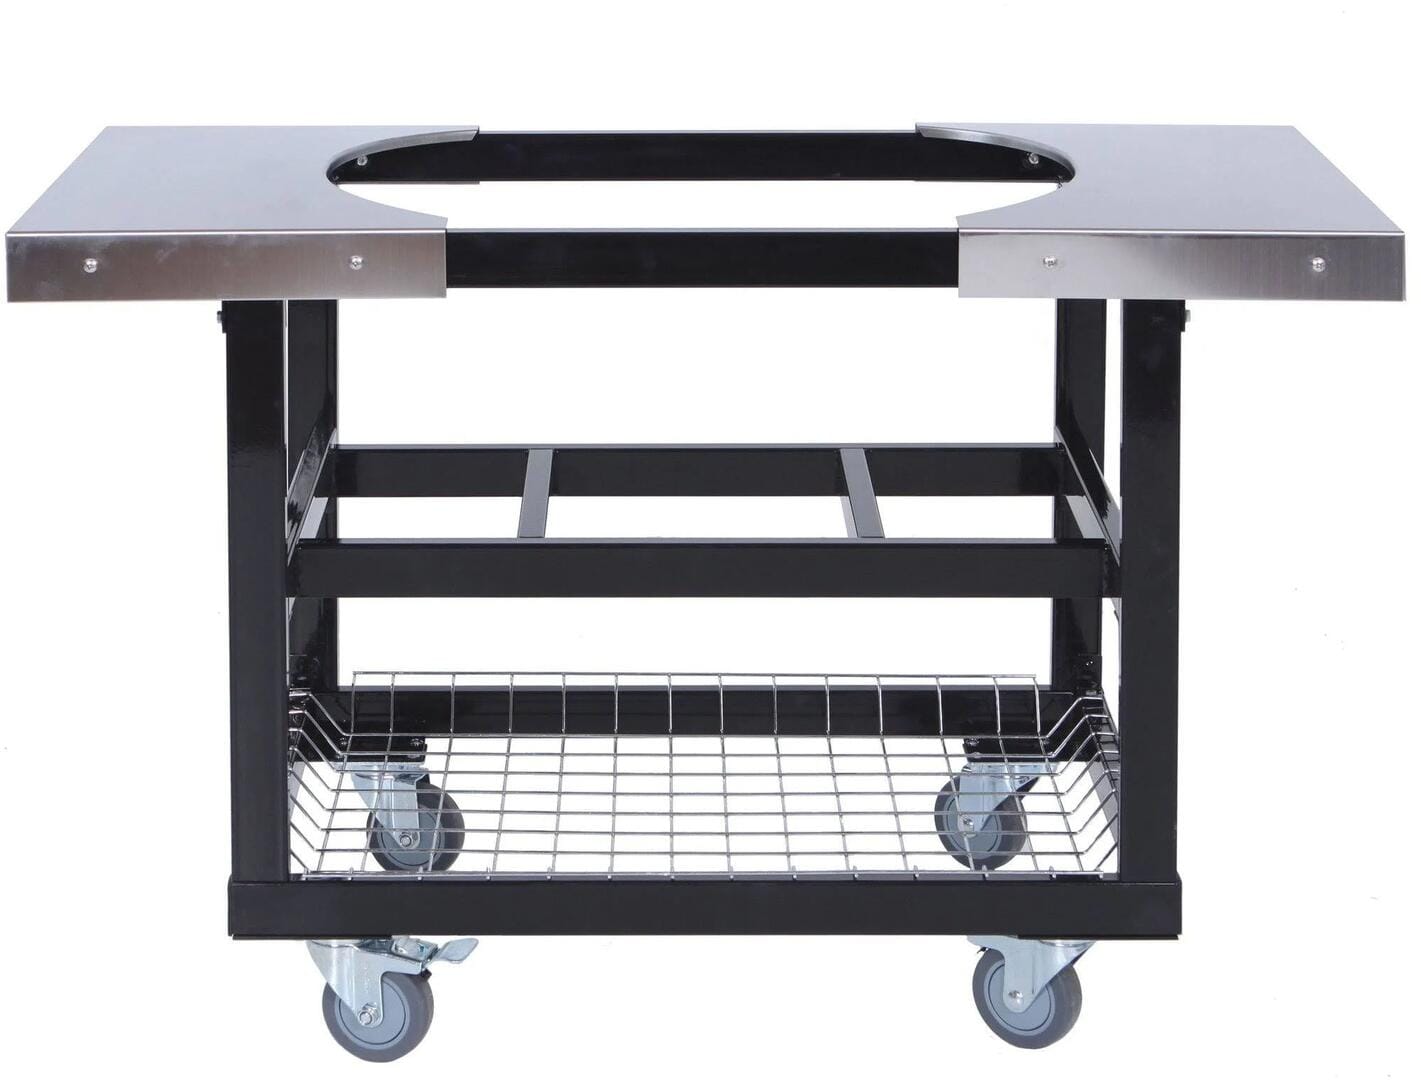 Primo Accessories Oval LG 300 / Oval XL 400 Primo Cart Base with Basket and SS Side Shelves for Oval LG 300, Oval XL 400, or Oval JR 200 / PG00370 or PG00320